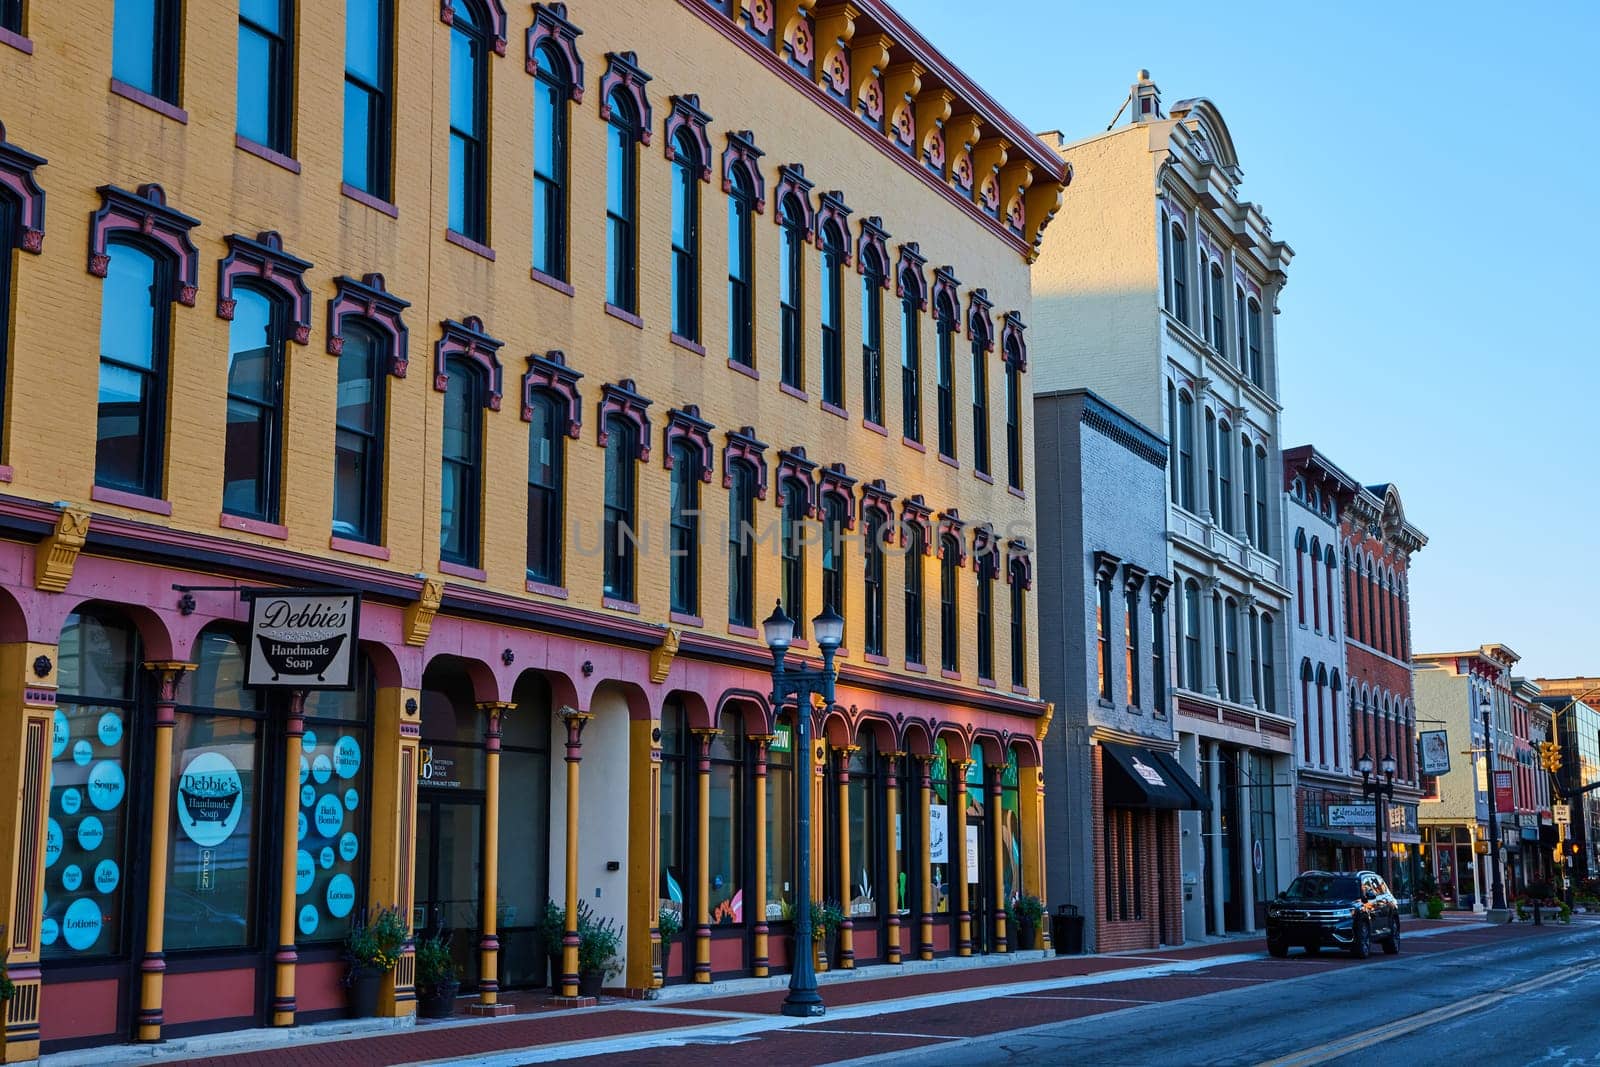 Colorful Historic Downtown Charm at Sunrise - Muncie, Indiana by njproductions